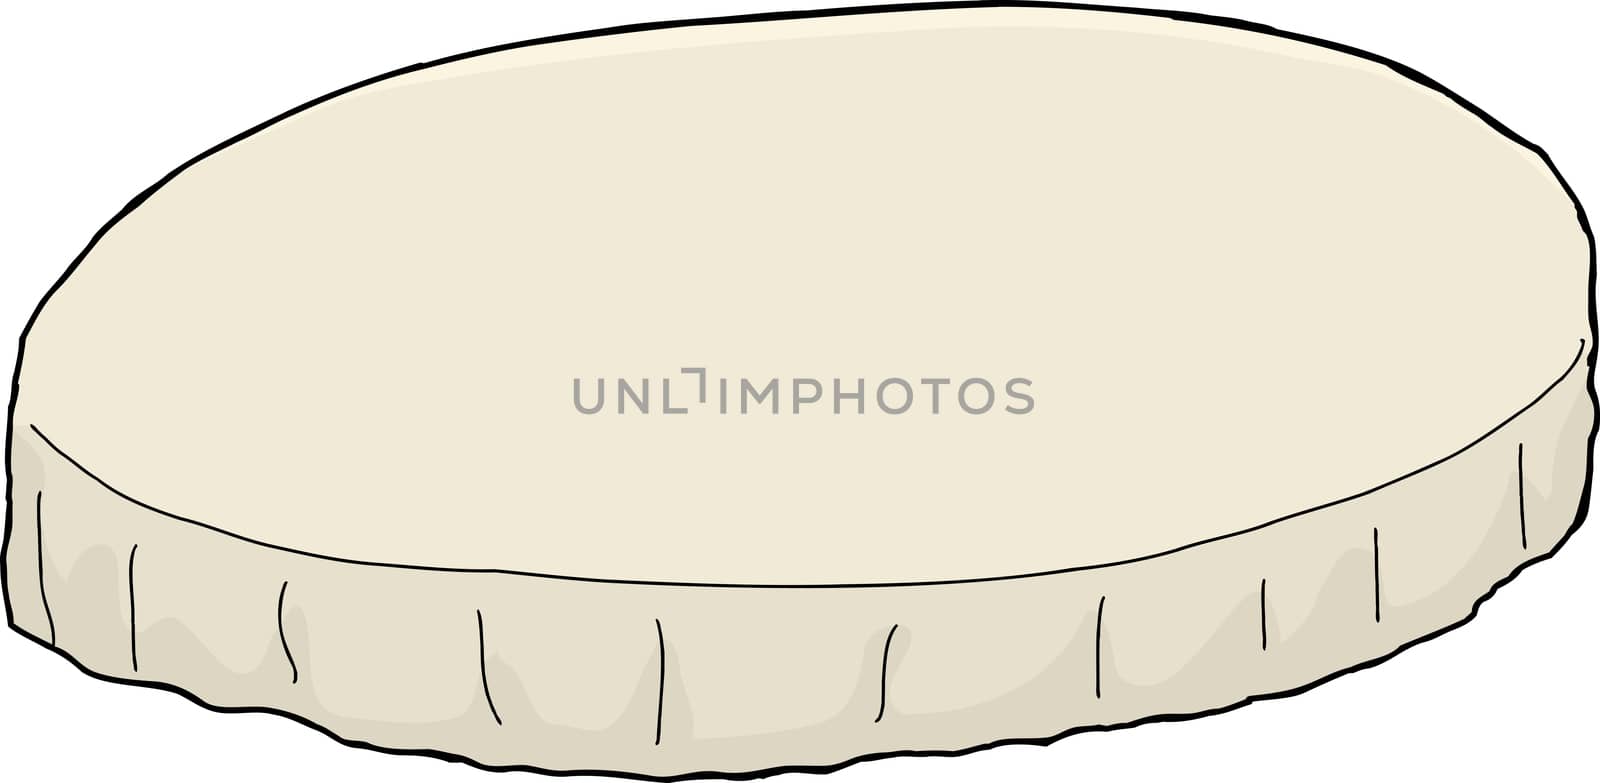 Single cartoon round tablecloth over white background